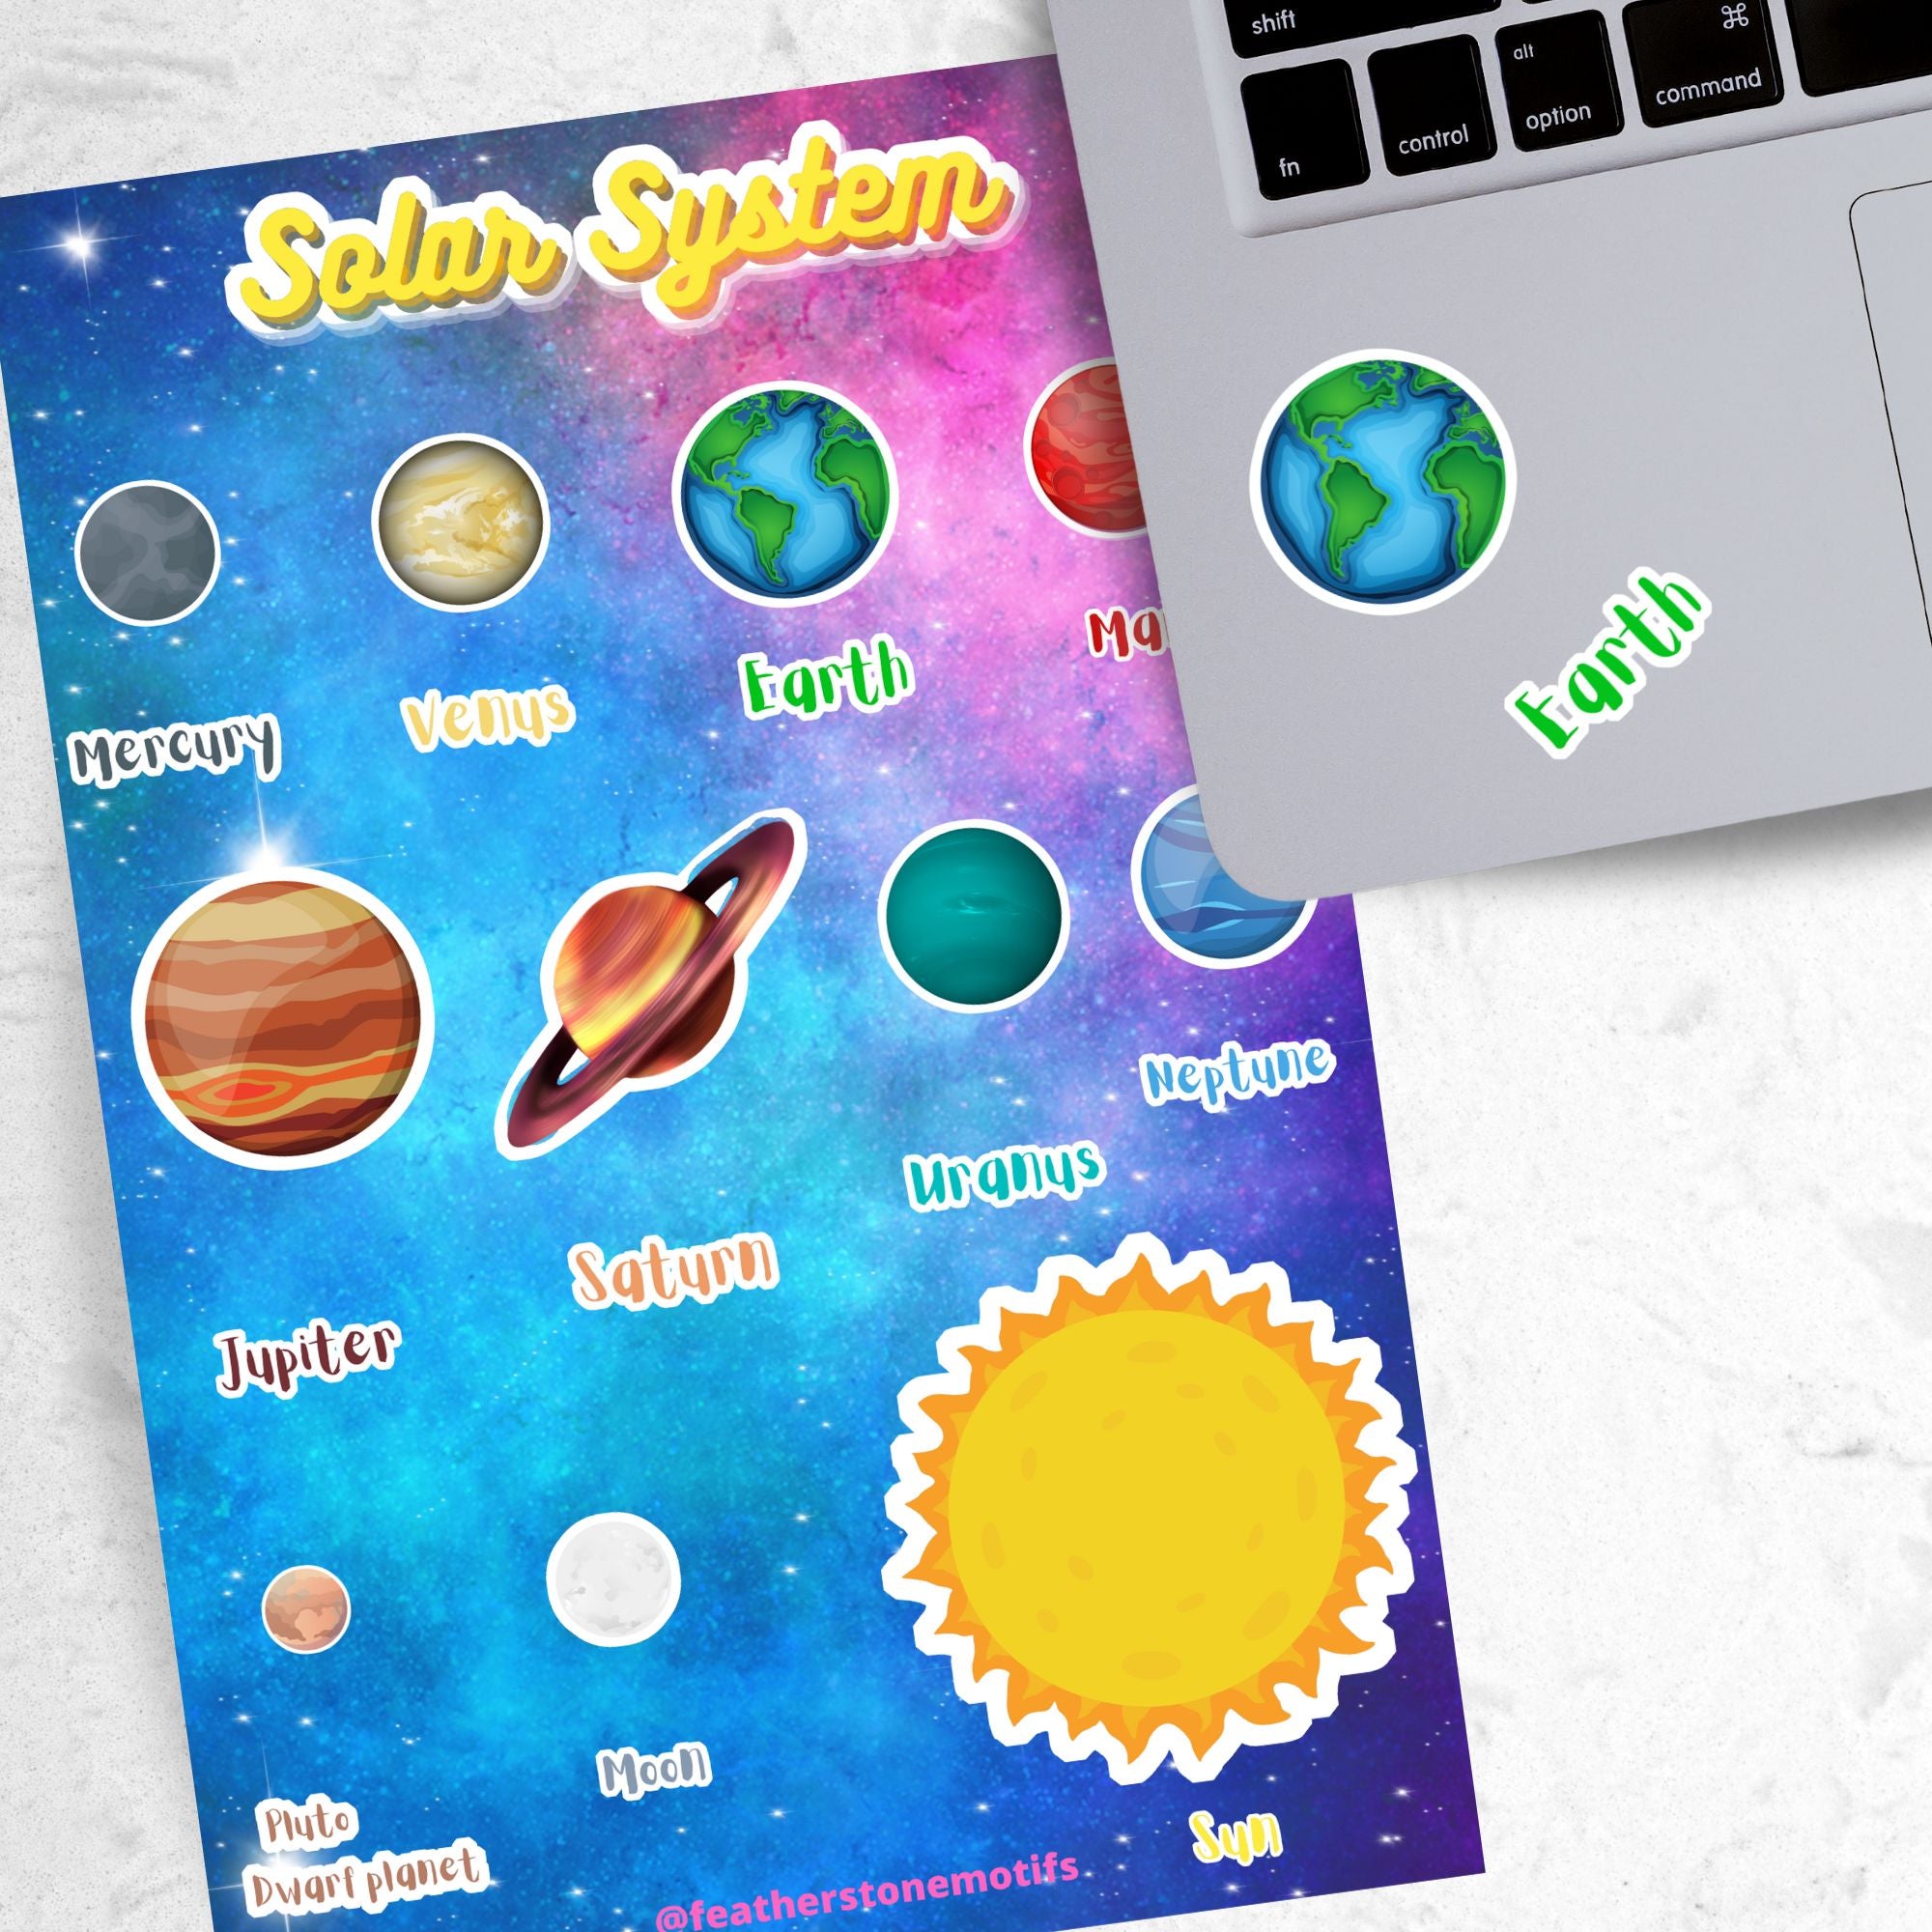 Our solar system - 8 (or 9) planets plus the sun and moon. This sticker sheet is great for class projects or for any aspiring space scientists! Stickers of every planet's image as well as the planet's name - Mercury, Venus, Earth, Mars, Jupiter, Saturn, Uranus, Neptune, and Pluto. This image shows the sticker sheet next to an open laptop with stickers of Earth's image and Name applied below the keyboard.